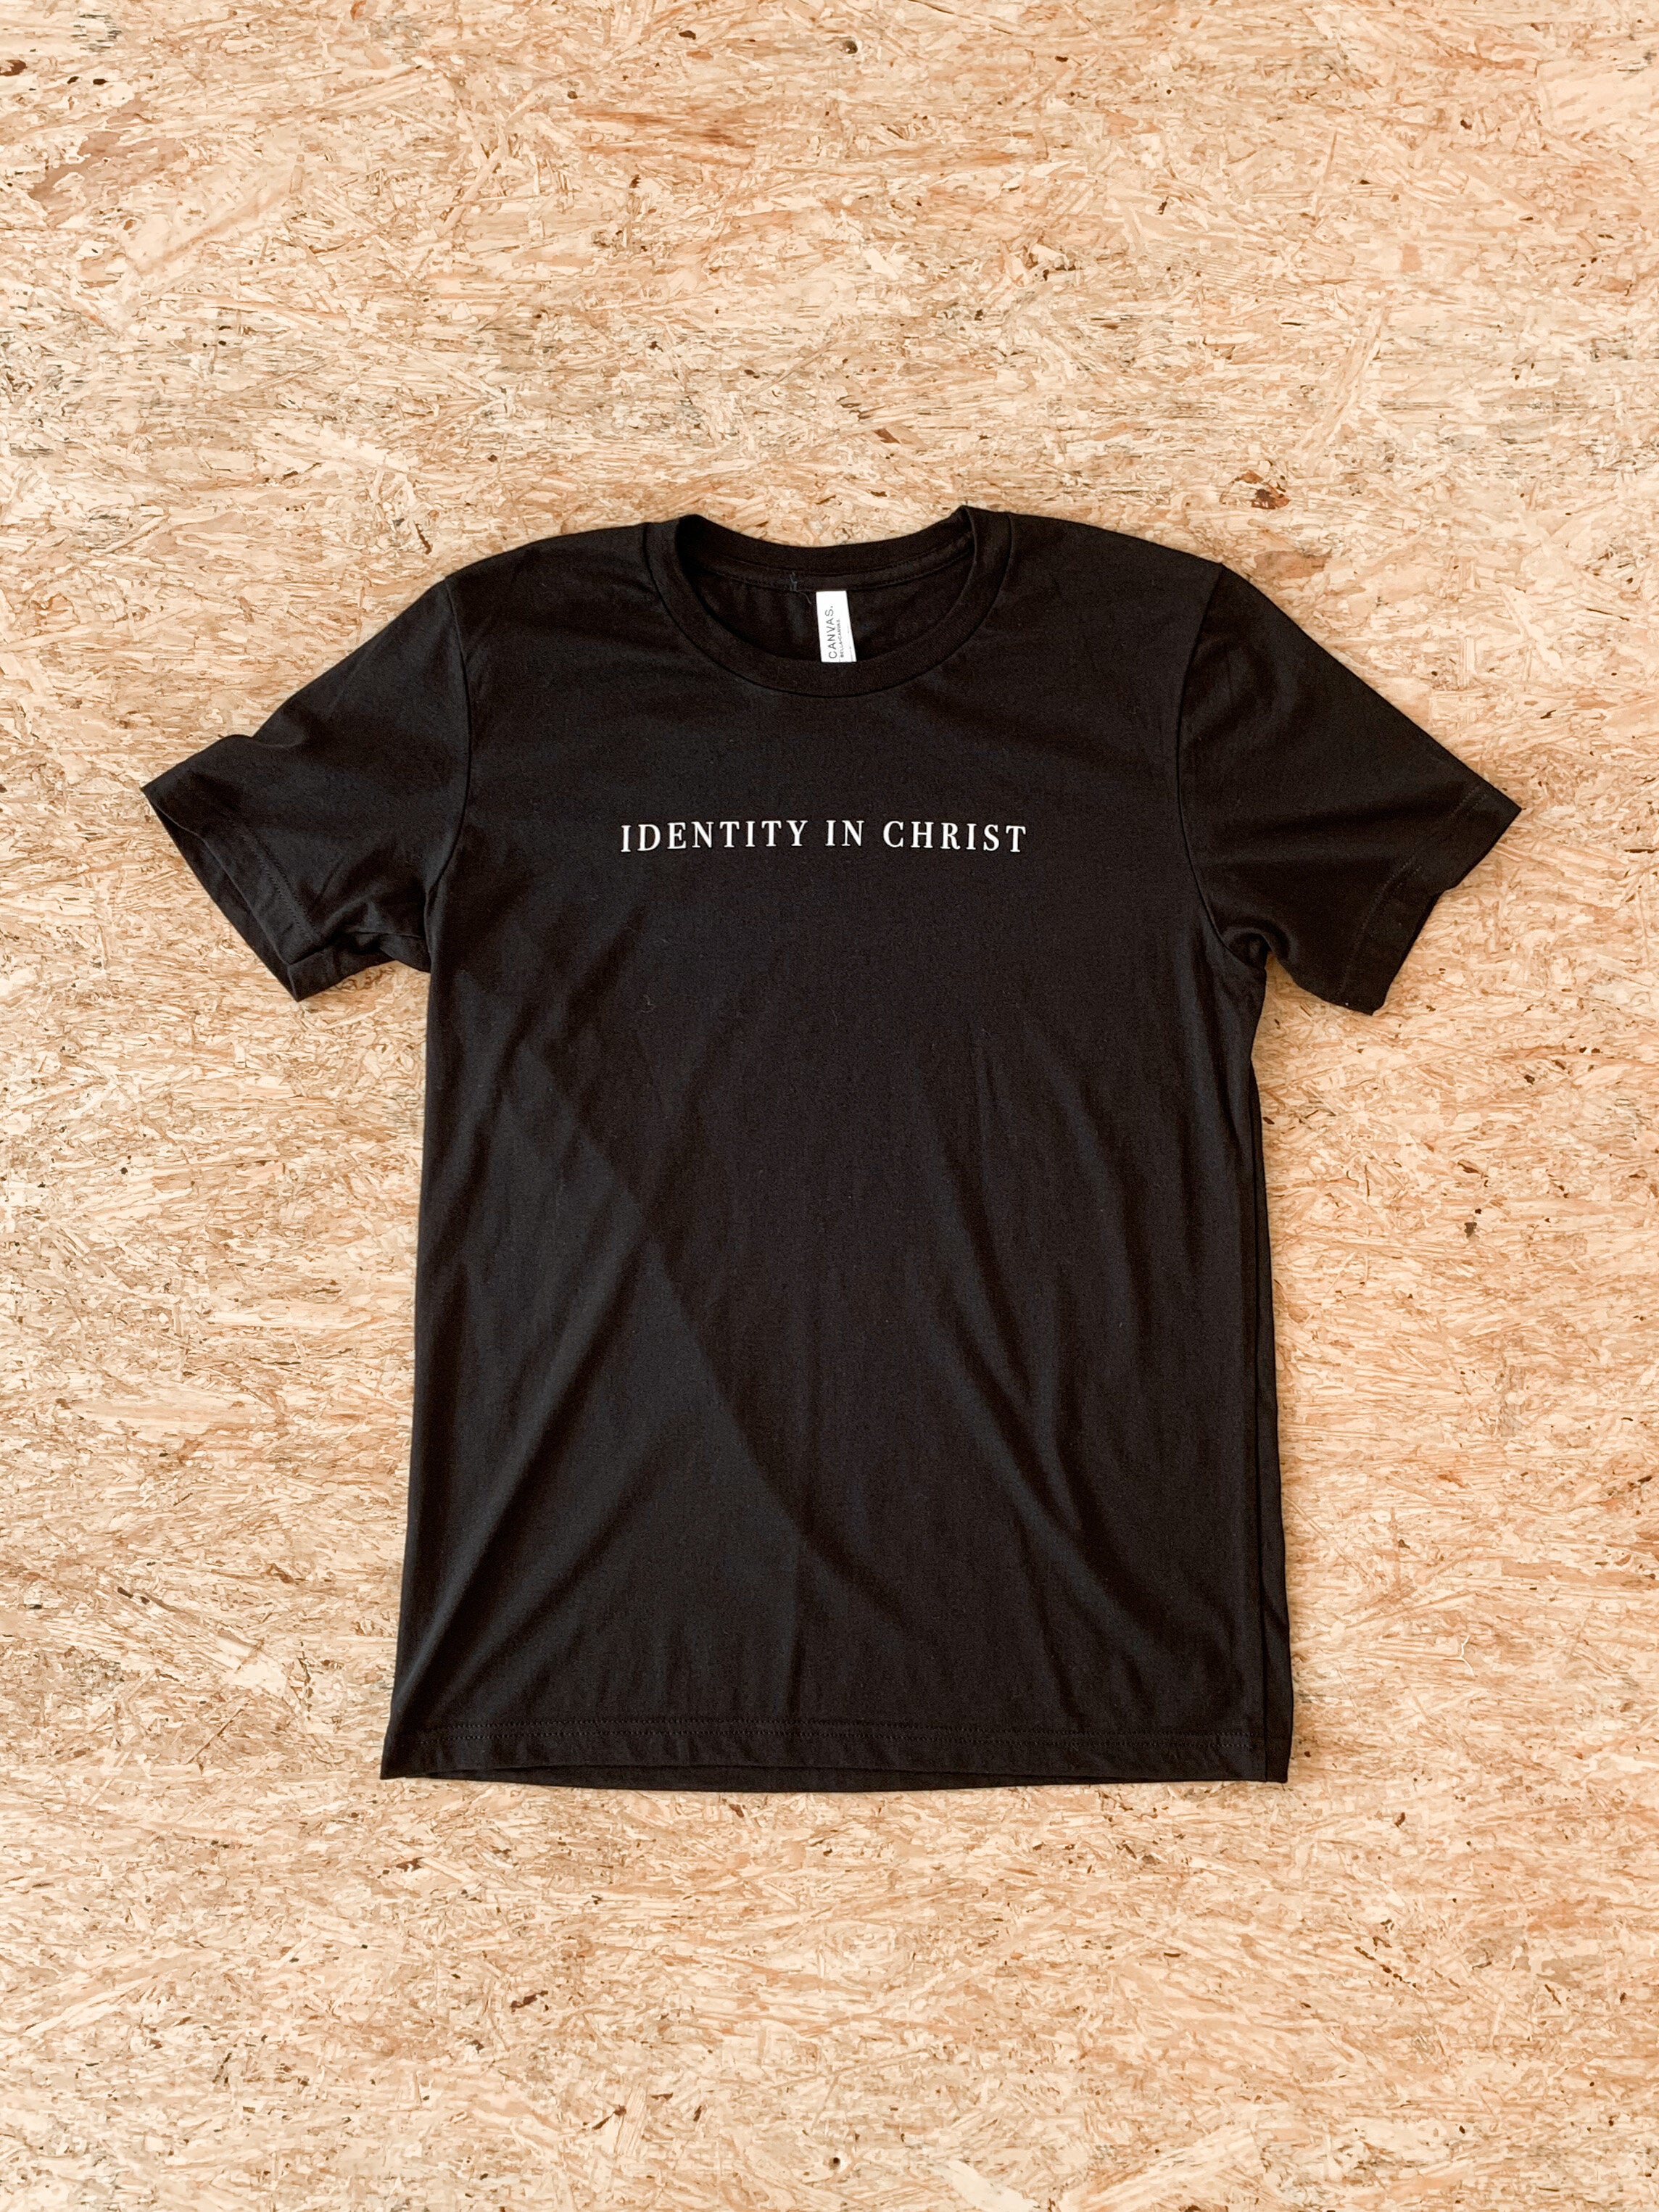 T-Shirt - Small Words - Identity in Christ - Black